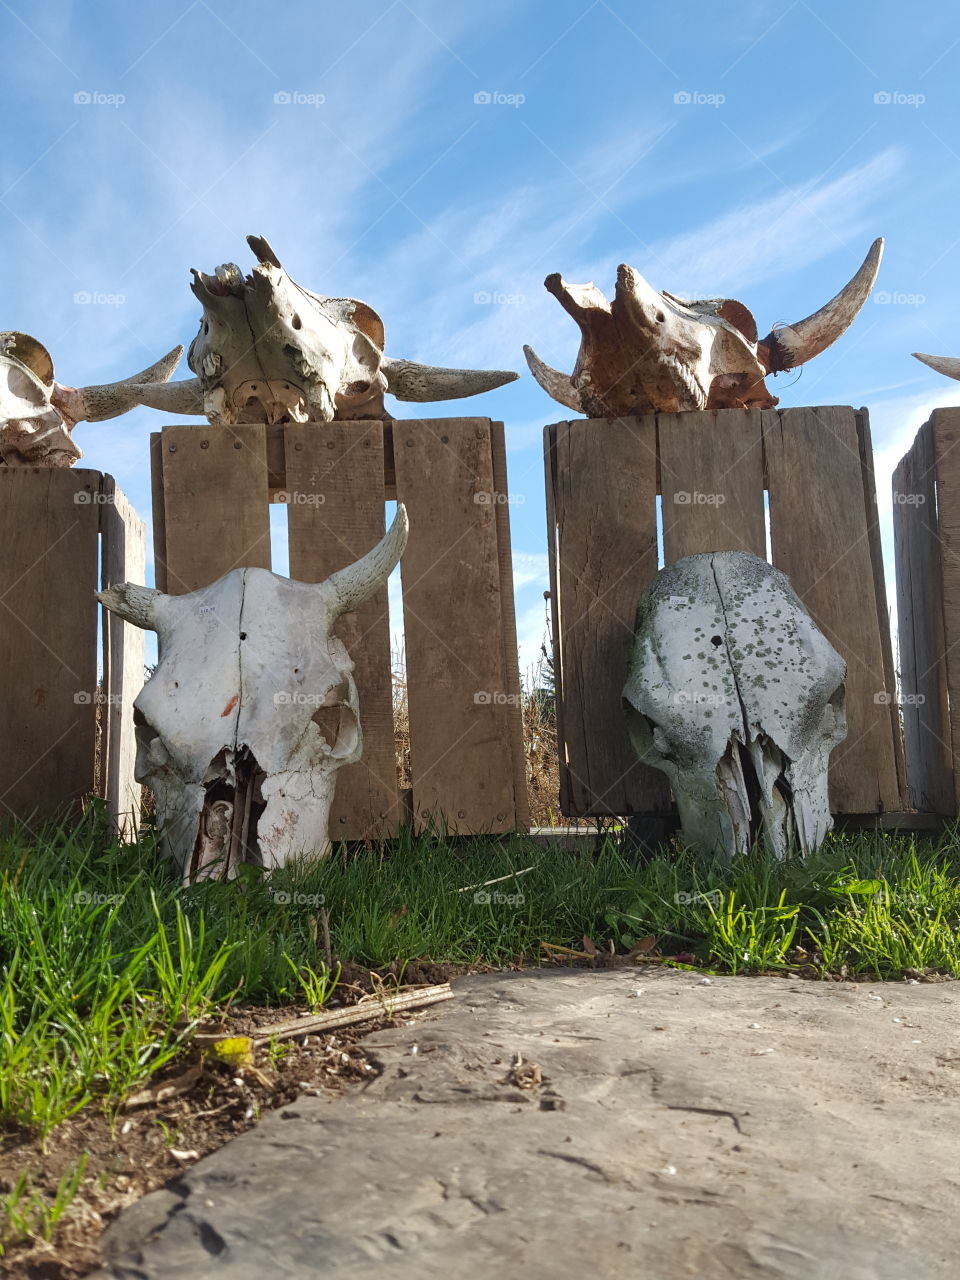 View of cow skulls on grass